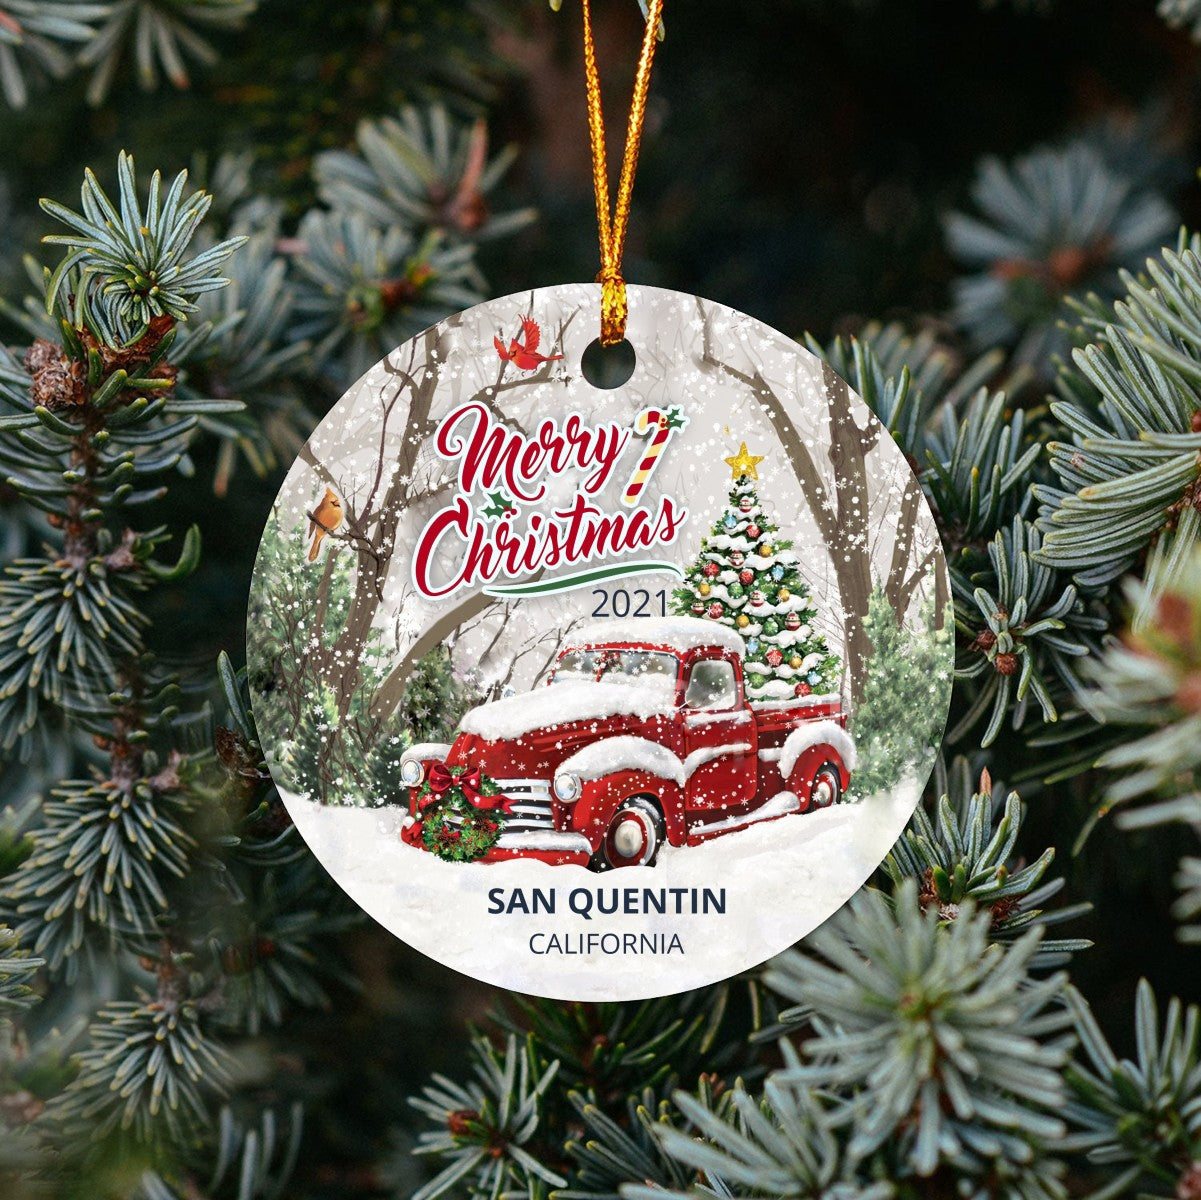 Christmas Tree Ornaments San Quentin - Ornament With Name City, State San Quentin California CA Ornament - Red Truck Xmas Ornaments 3'' Plastic Gift For Family, Friend And Housewarming